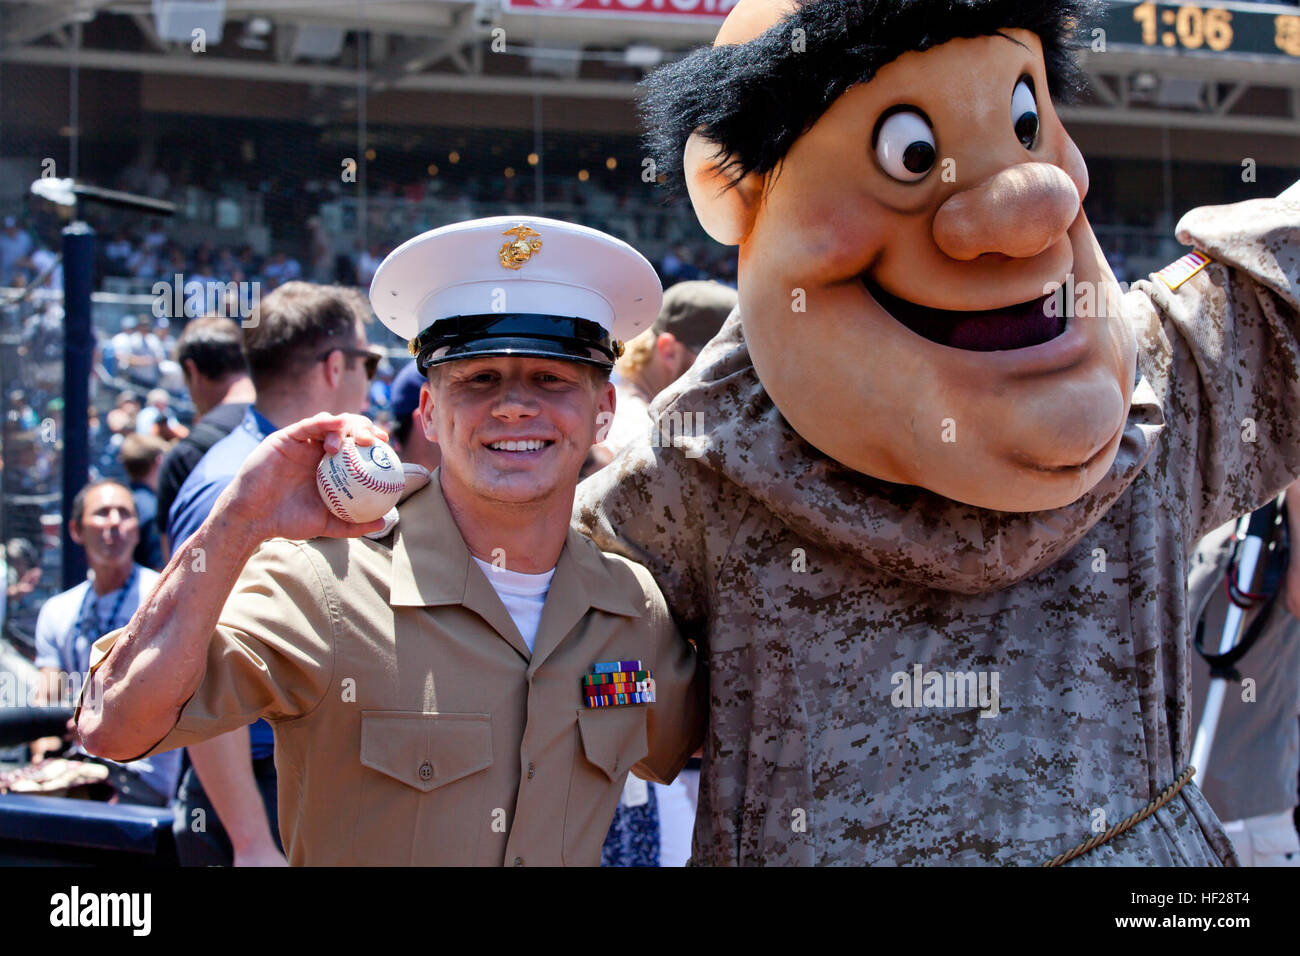 Retired U.S. Marine Corps Cpl. William Kyle Carpenter, left, poses for a photo with San Diego Padres mascot Swinging Friar after throwing the ceremonial first pitch during a baseball game at Petco Park in San Diego, Calif., June 22, 2014. The visit is part of a media tour after he was awarded the Medal of Honor at the White House on June 19, 2014. (U.S. Marine Corps photo by Cpl. Michael C. Guinto/Released) Medal of Honor Kyle Carpenter 140622-M-LI307-110 Stock Photo